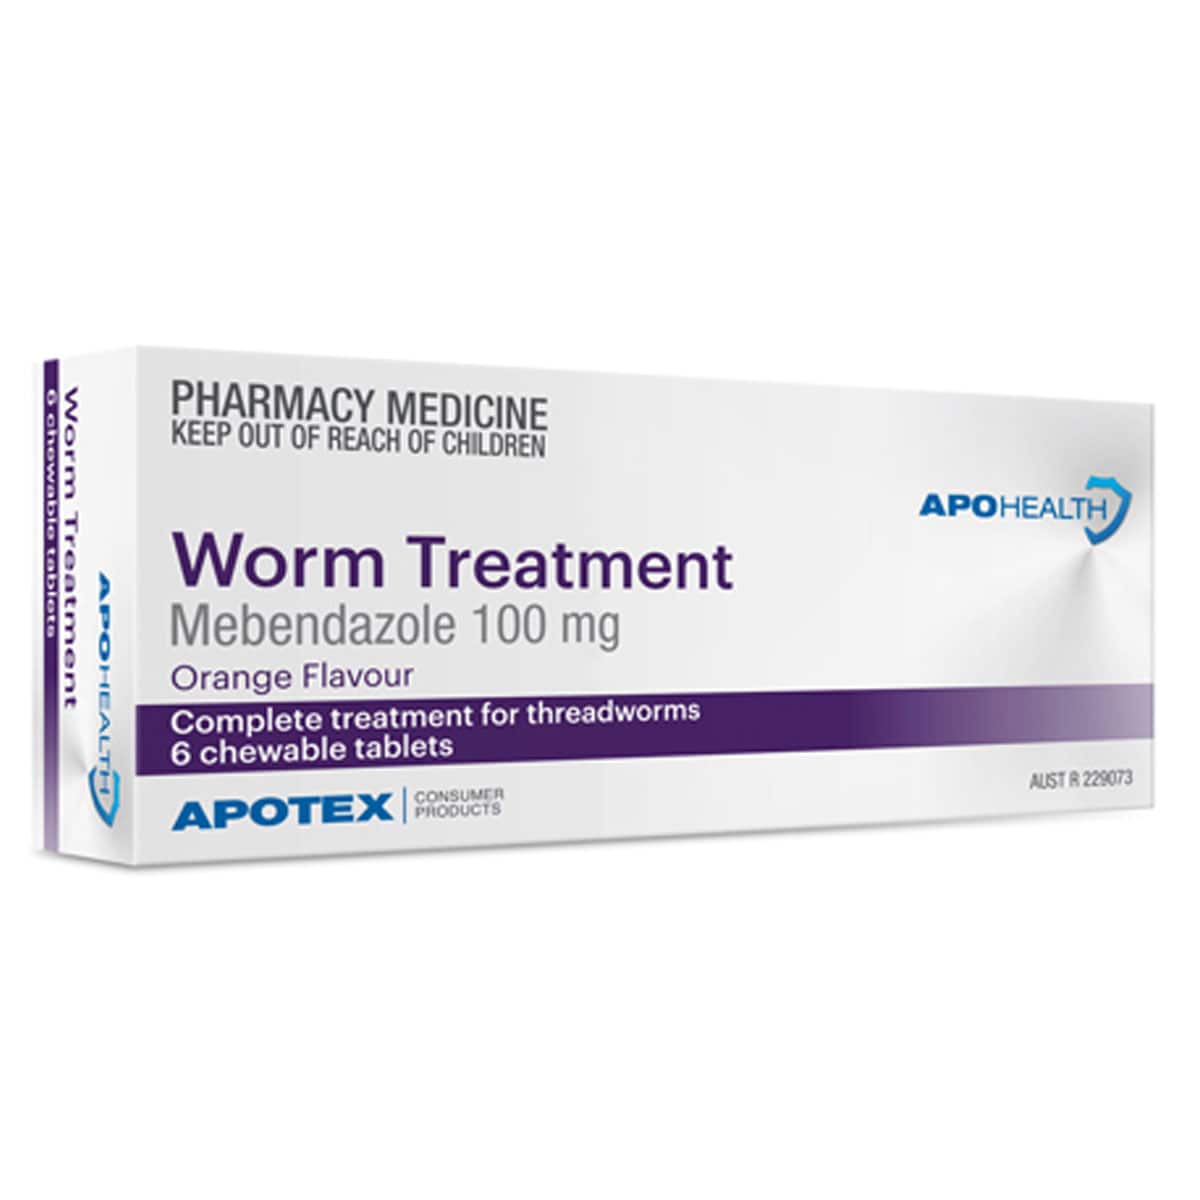 APOHEALTH Worm Treatment 6 Chewable Tablets